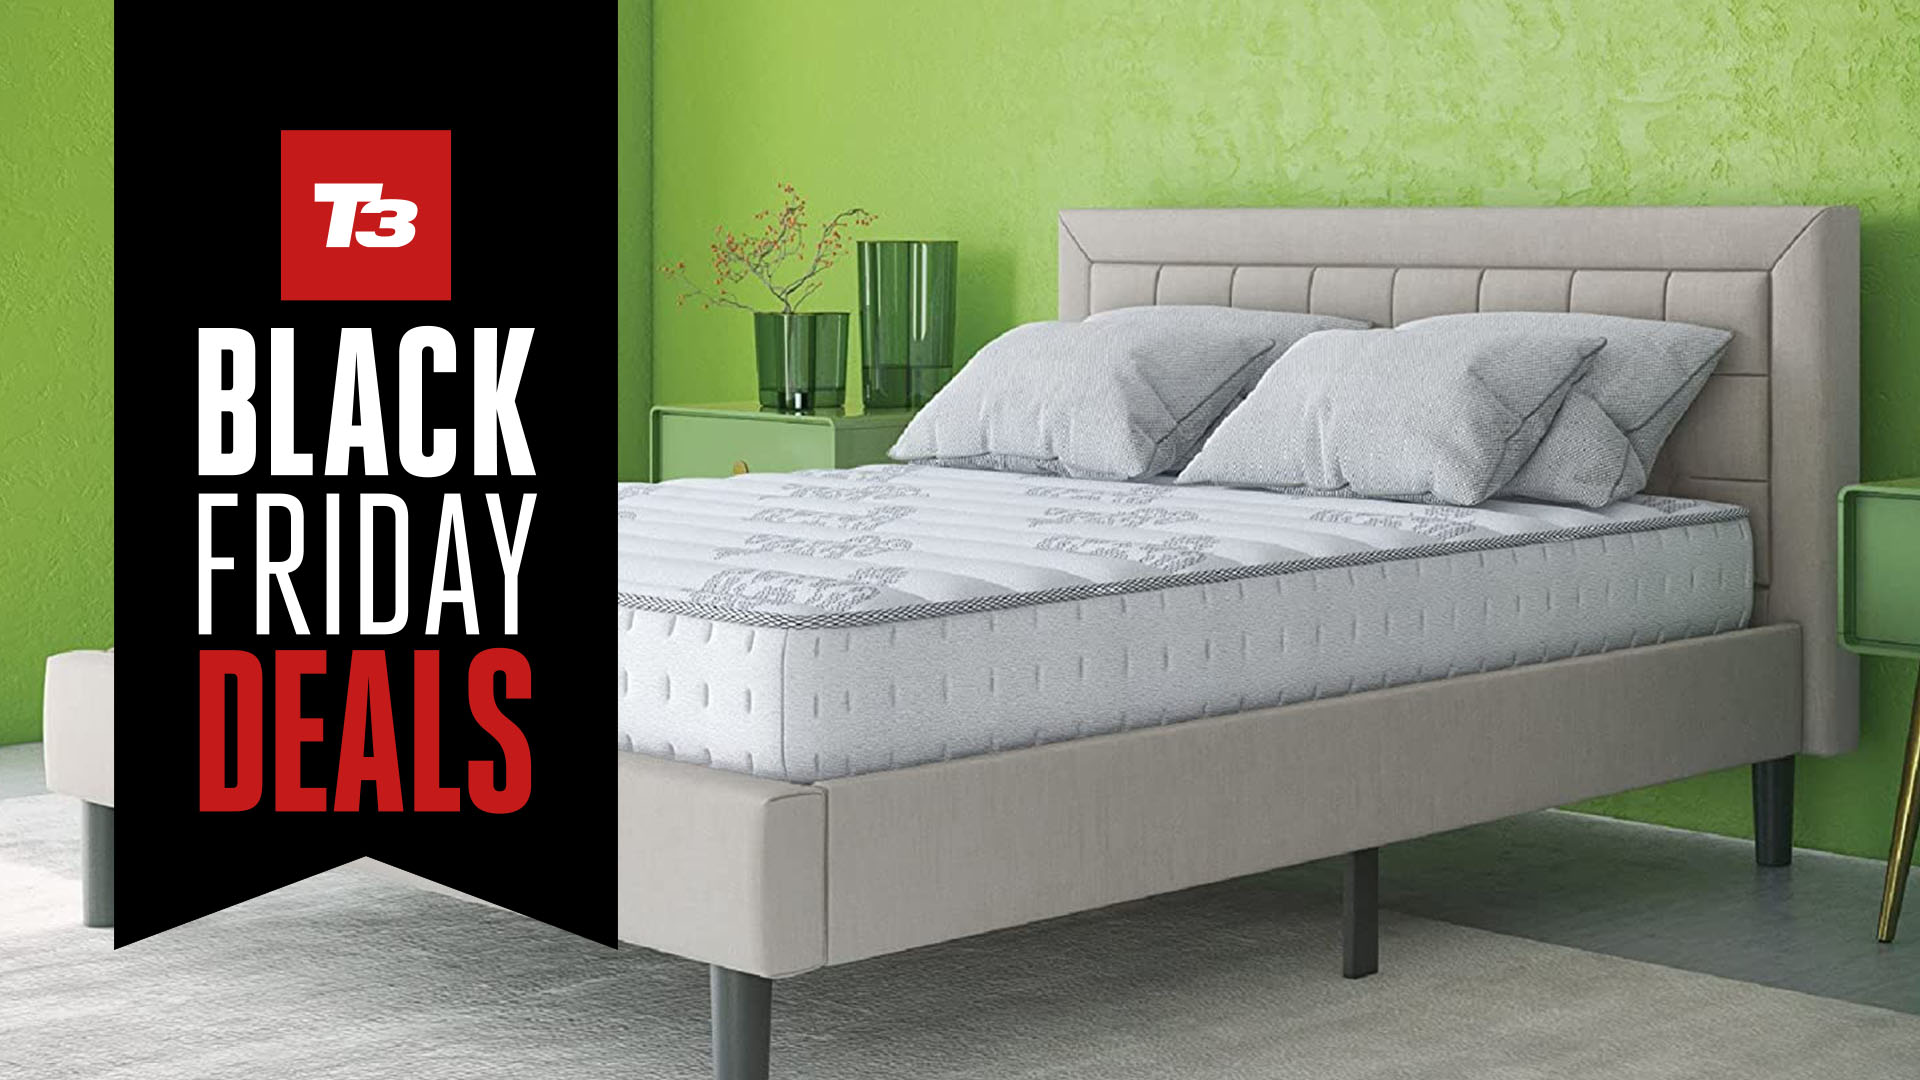 This Queen Mattress Black Friday, California King Bed Black Friday